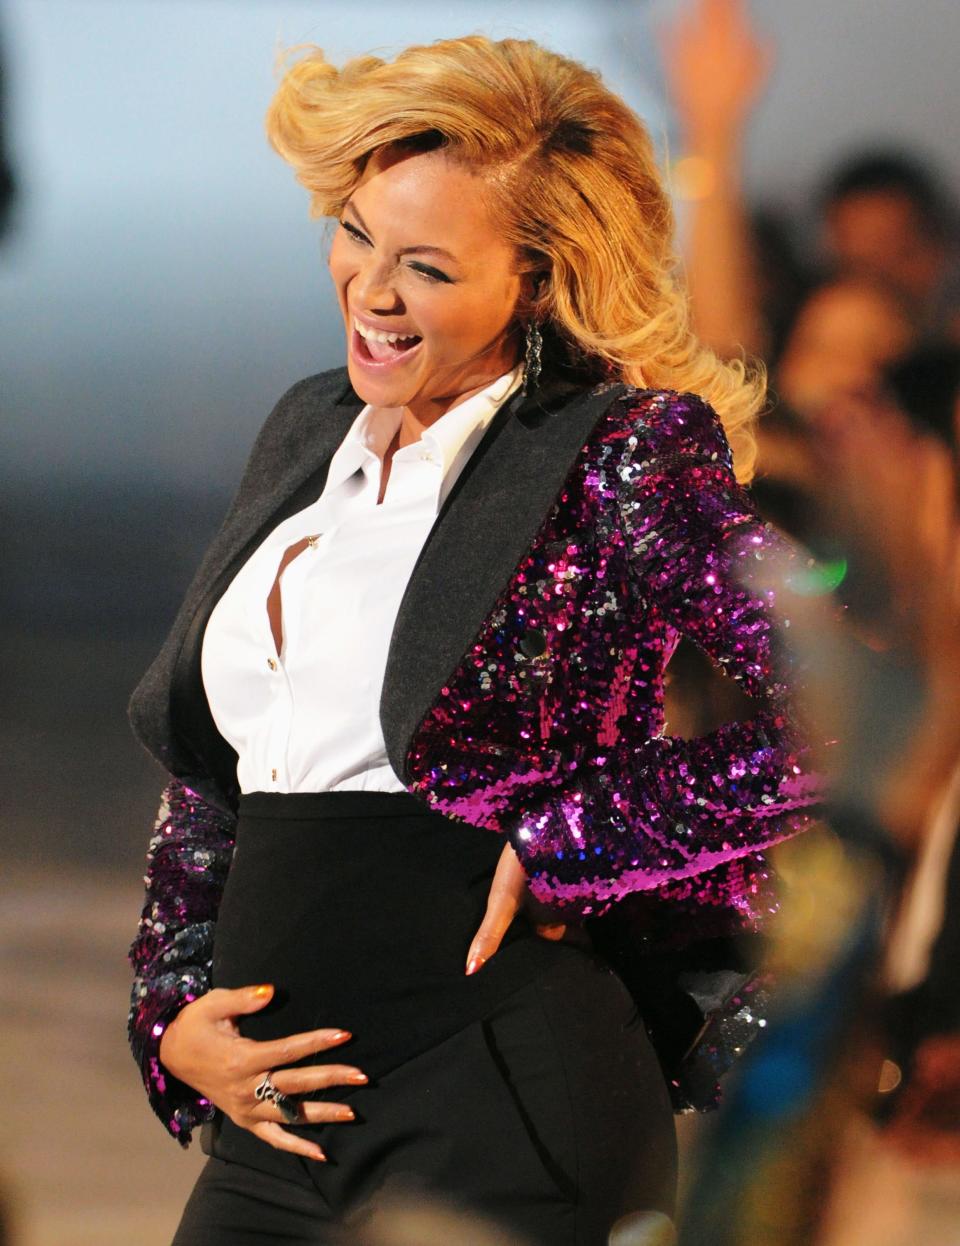 Beyonce shared her first pregnancy after performing onstage at the MTV Video Music Awards in August 2011.